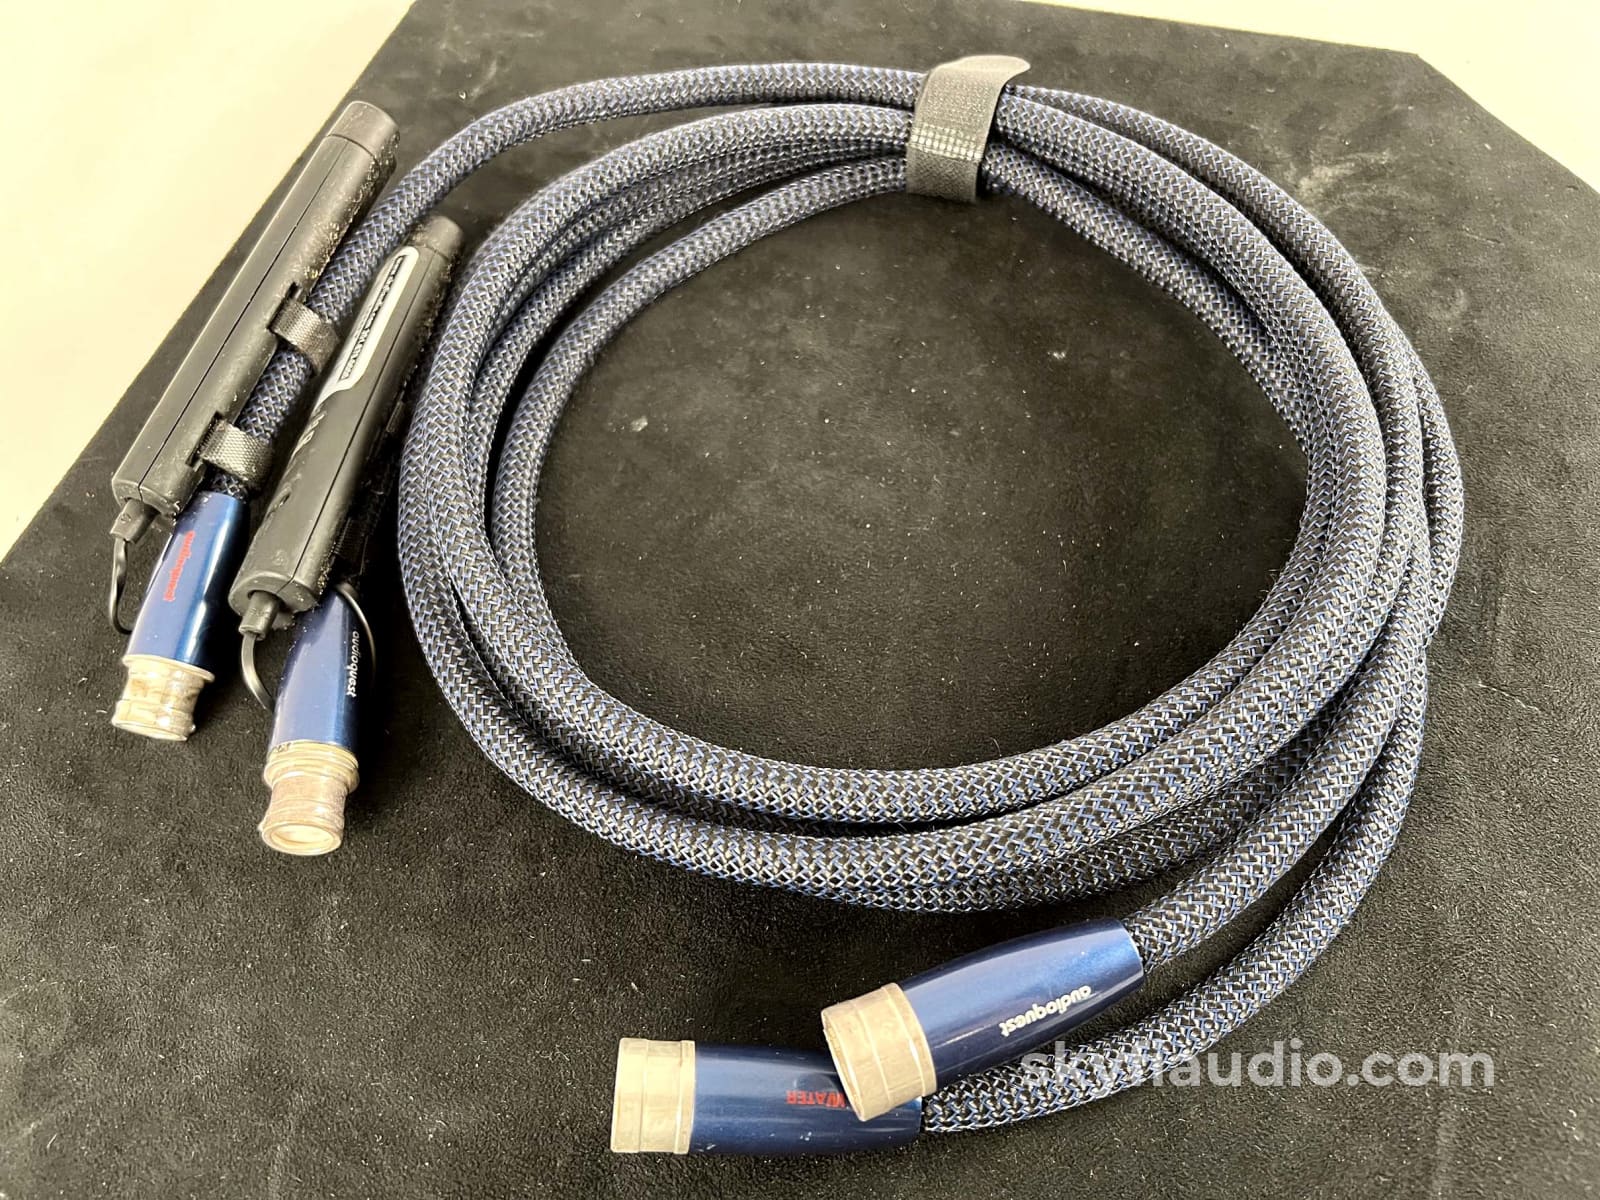 Audioquest Rivers & Elements Series - Water Xlr Audio Interconnects With Dbs 2M Cables